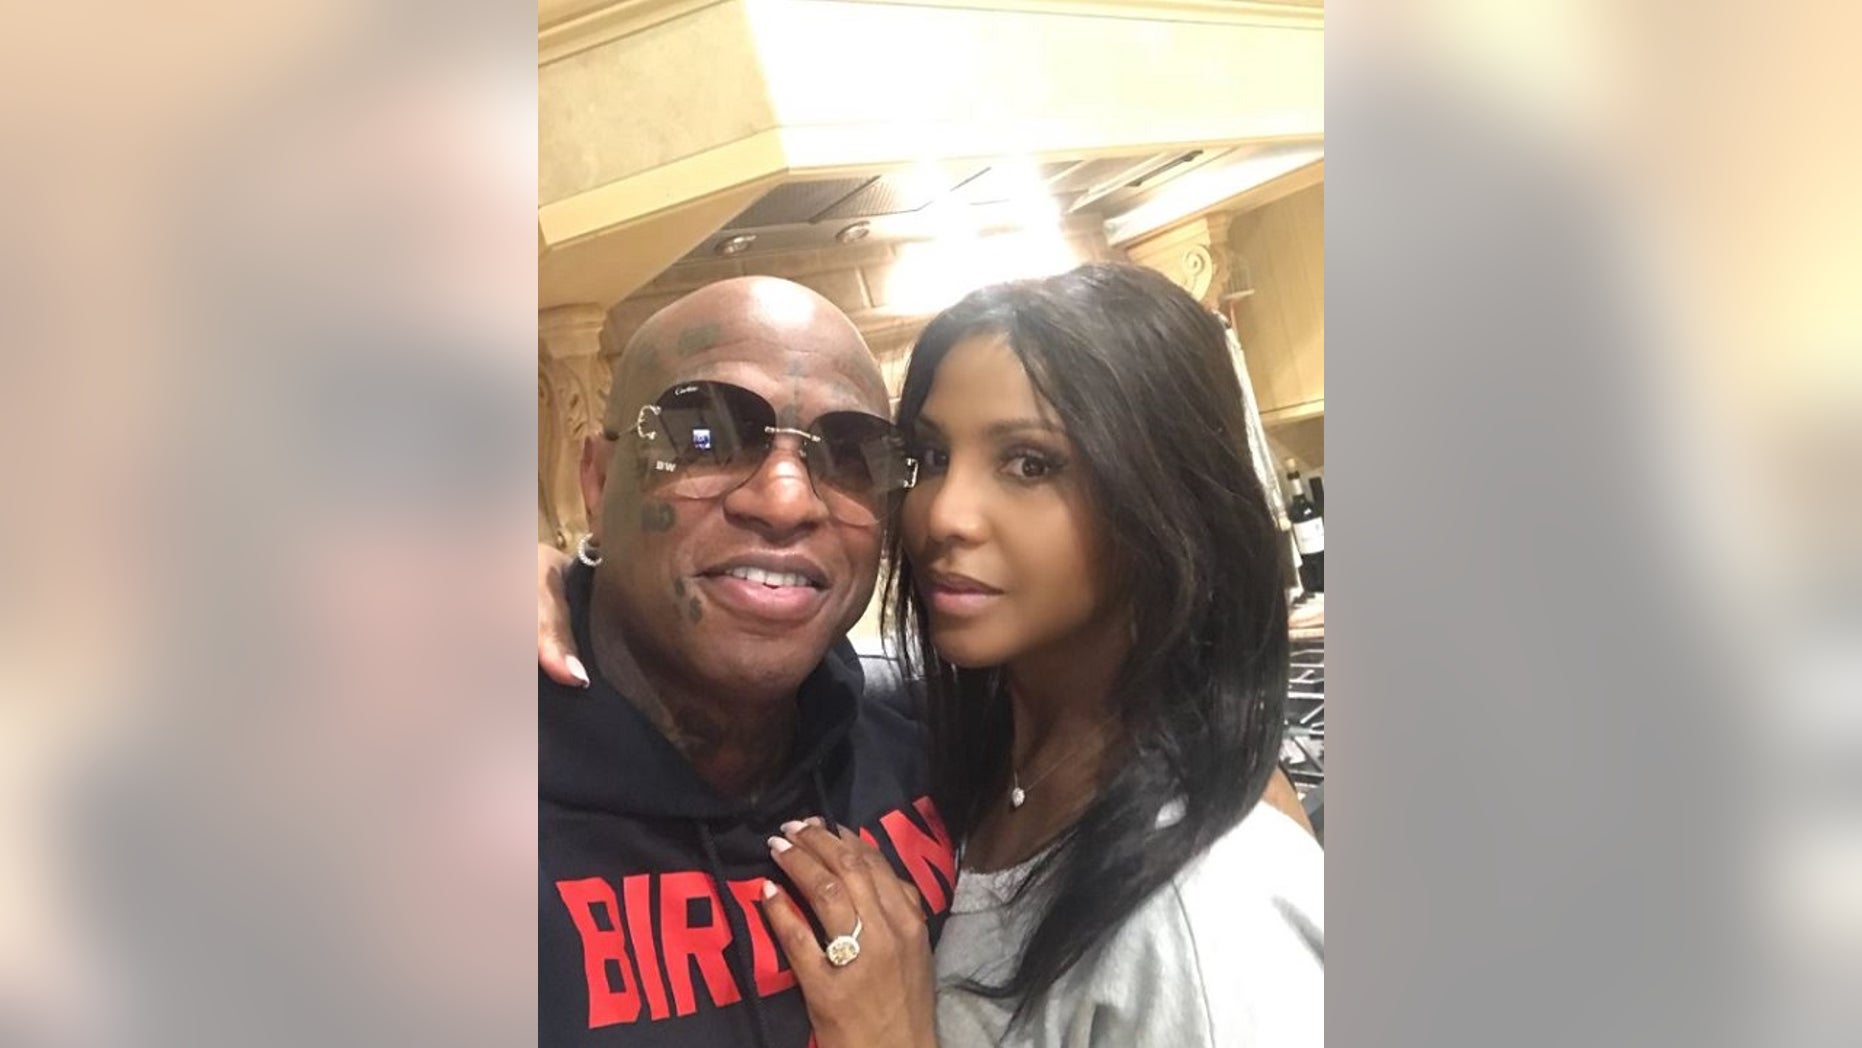 Toni Braxton lost her engagement ring after a recent flight with Delta. The singer and Birdman confirmed their engagement earlier this year.